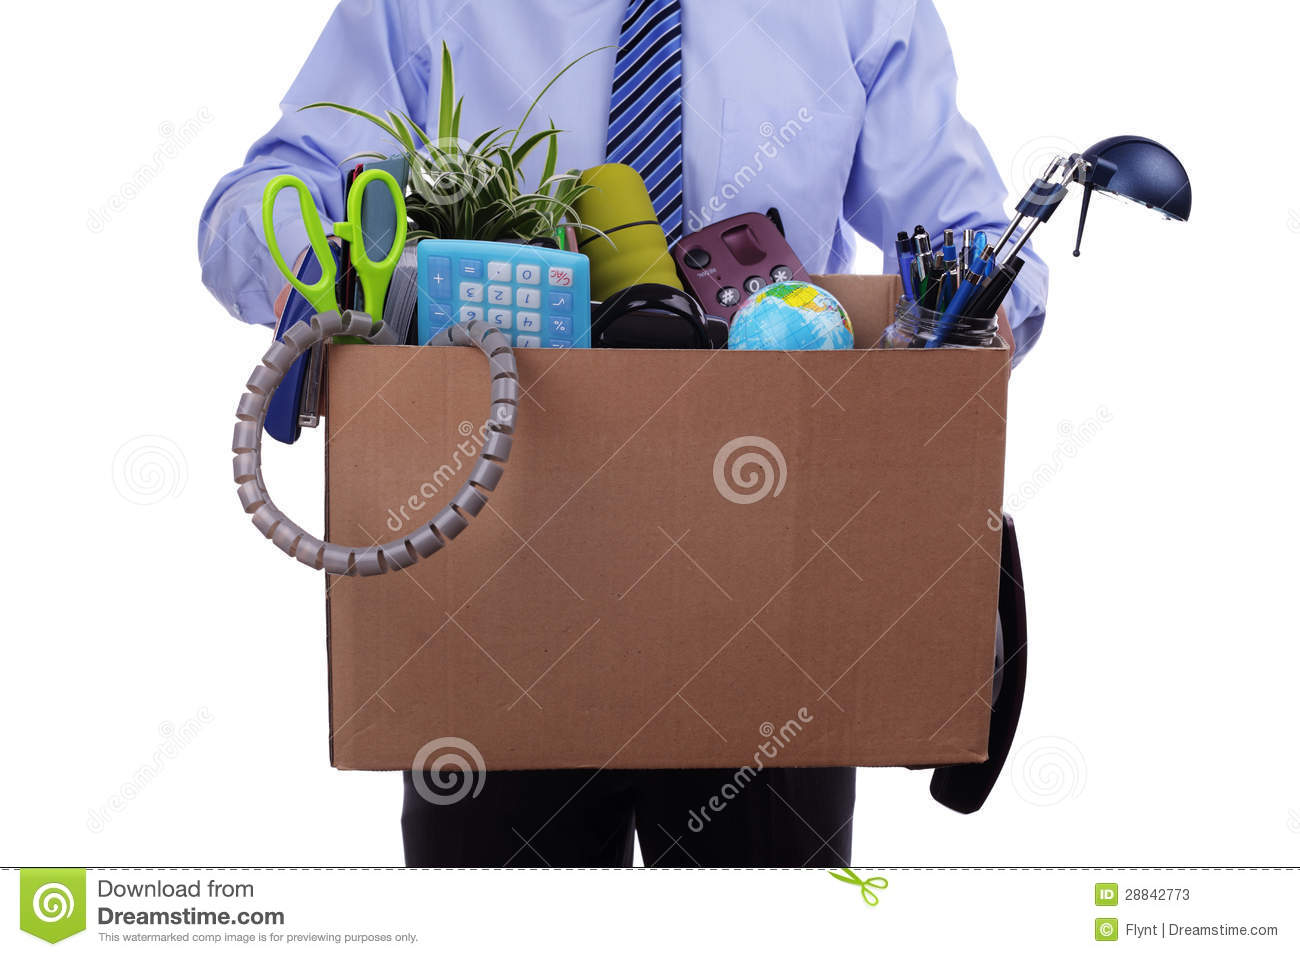 Unemployment Concept Fired Man With Personal Items In A Box